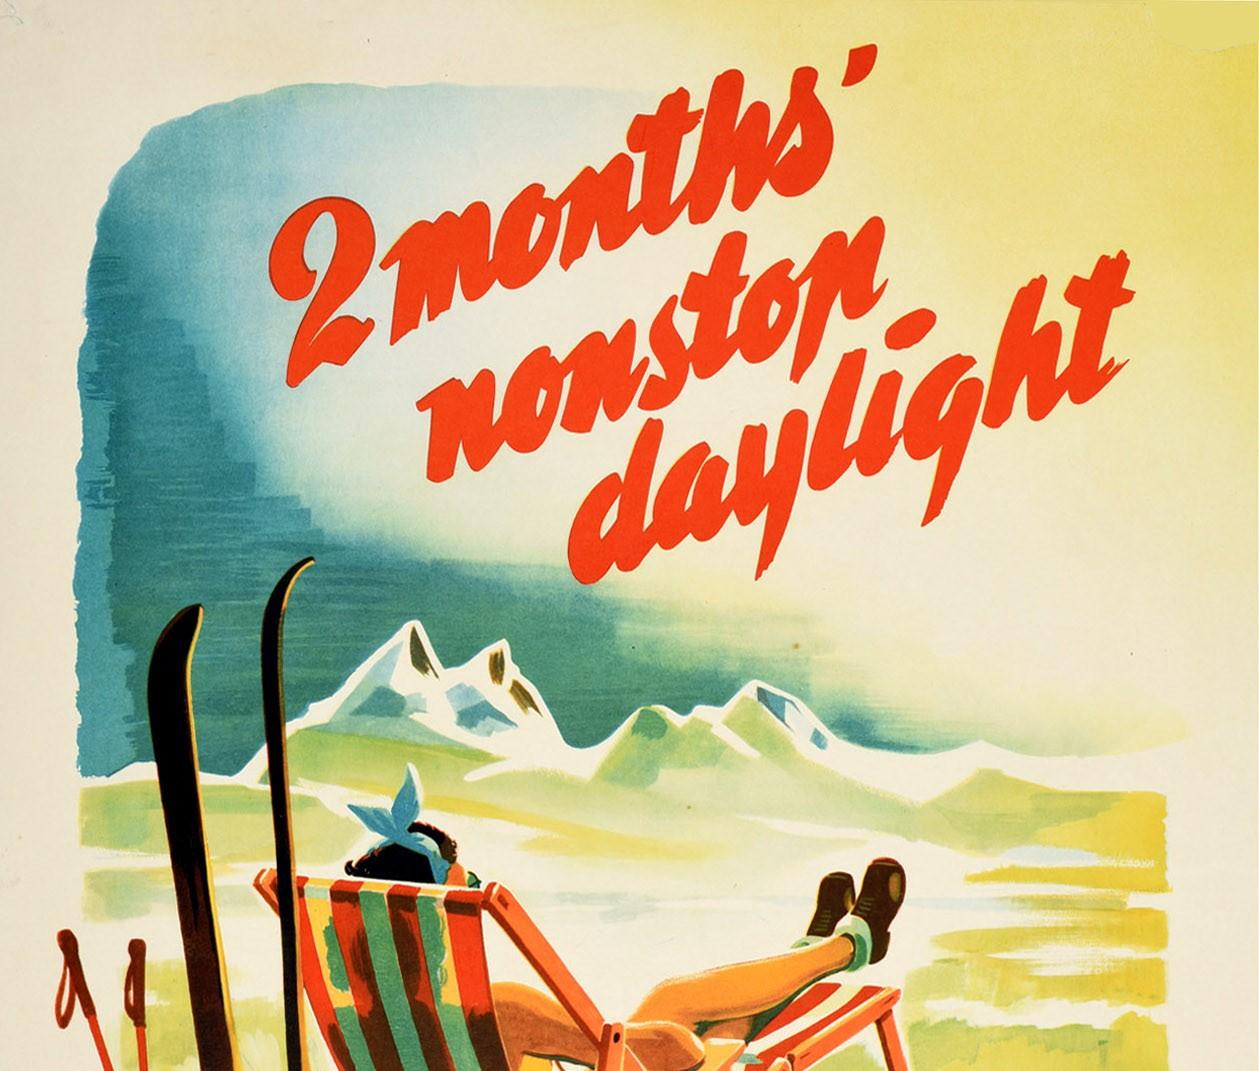 Original vintage travel poster for Lapplandia Sweden 2 months' nonstop daylight The Midnightsun Hotel featuring a great image of snow topped mountains on the horizon with a lady relaxing on a white and red striped deckchair on a patch of grass and